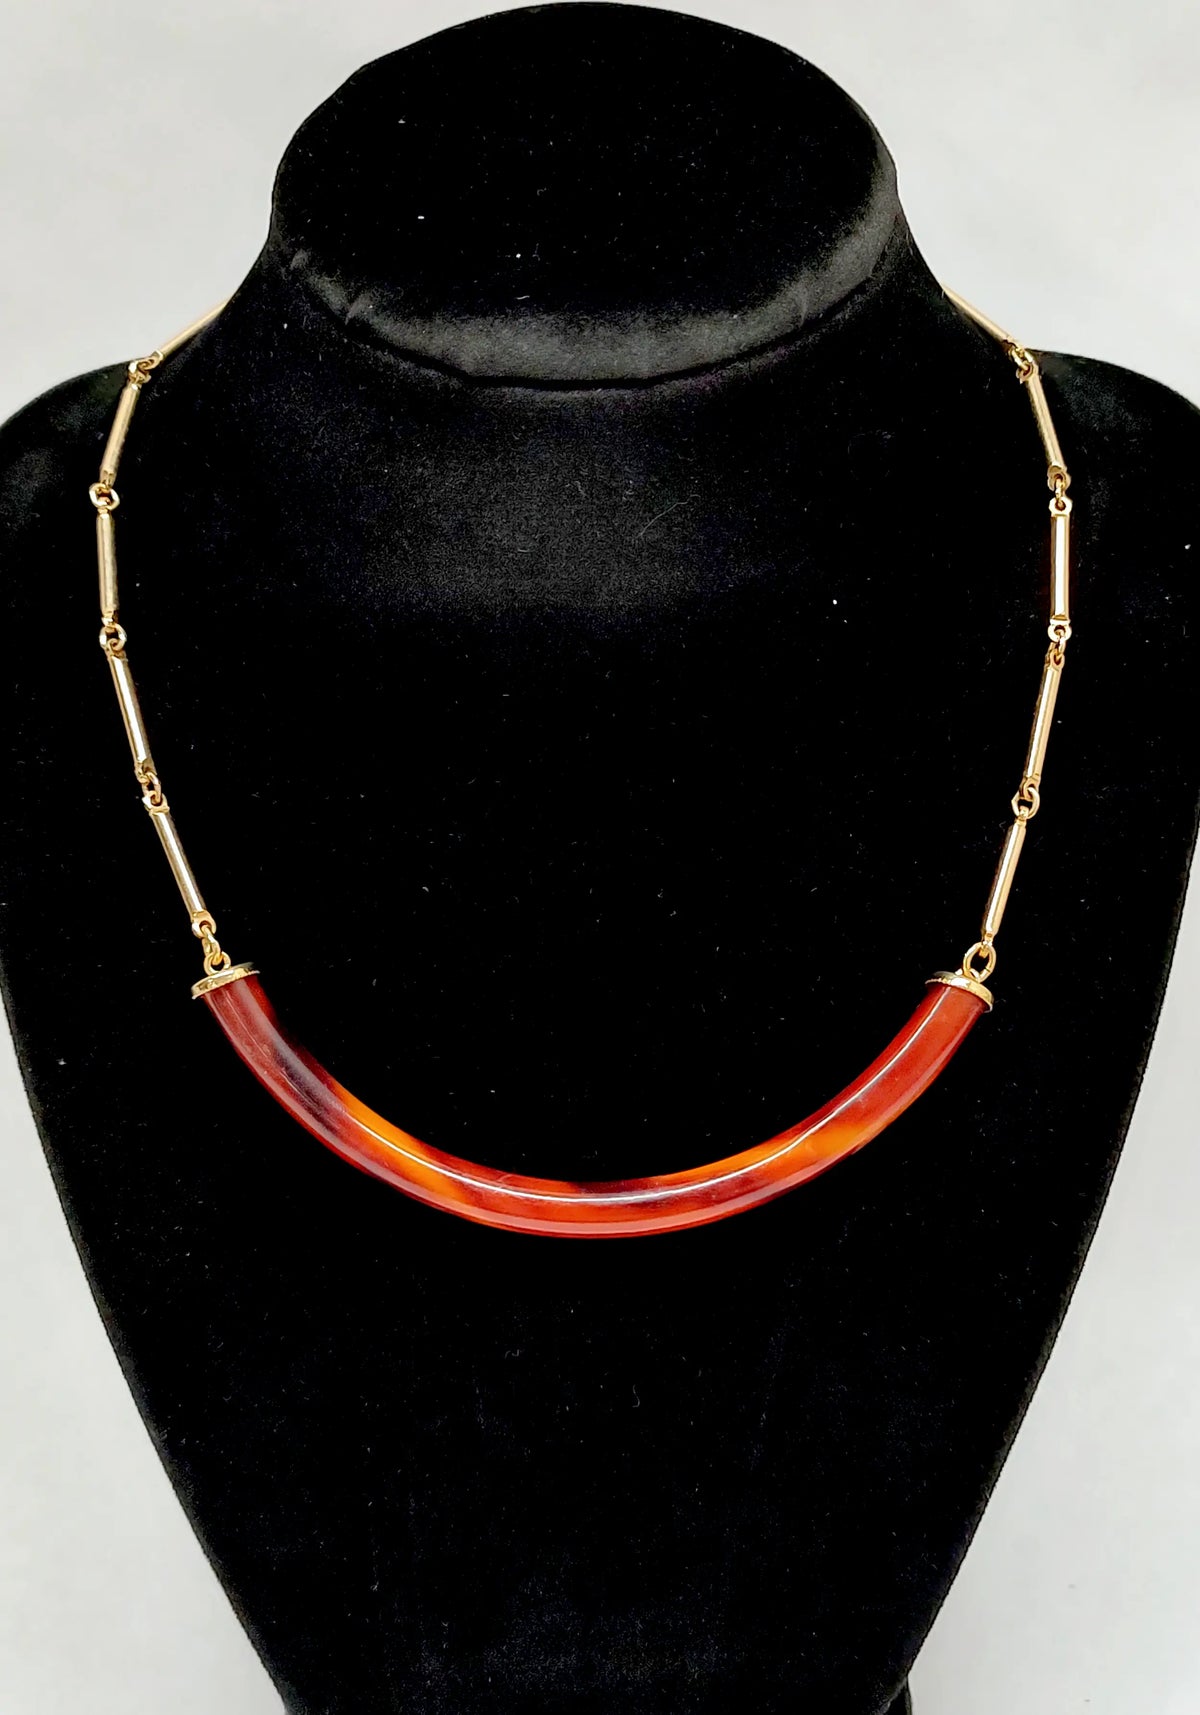 1978 Sarah Coventry Carmel Twist 16" Necklace - Hers and His Treasures